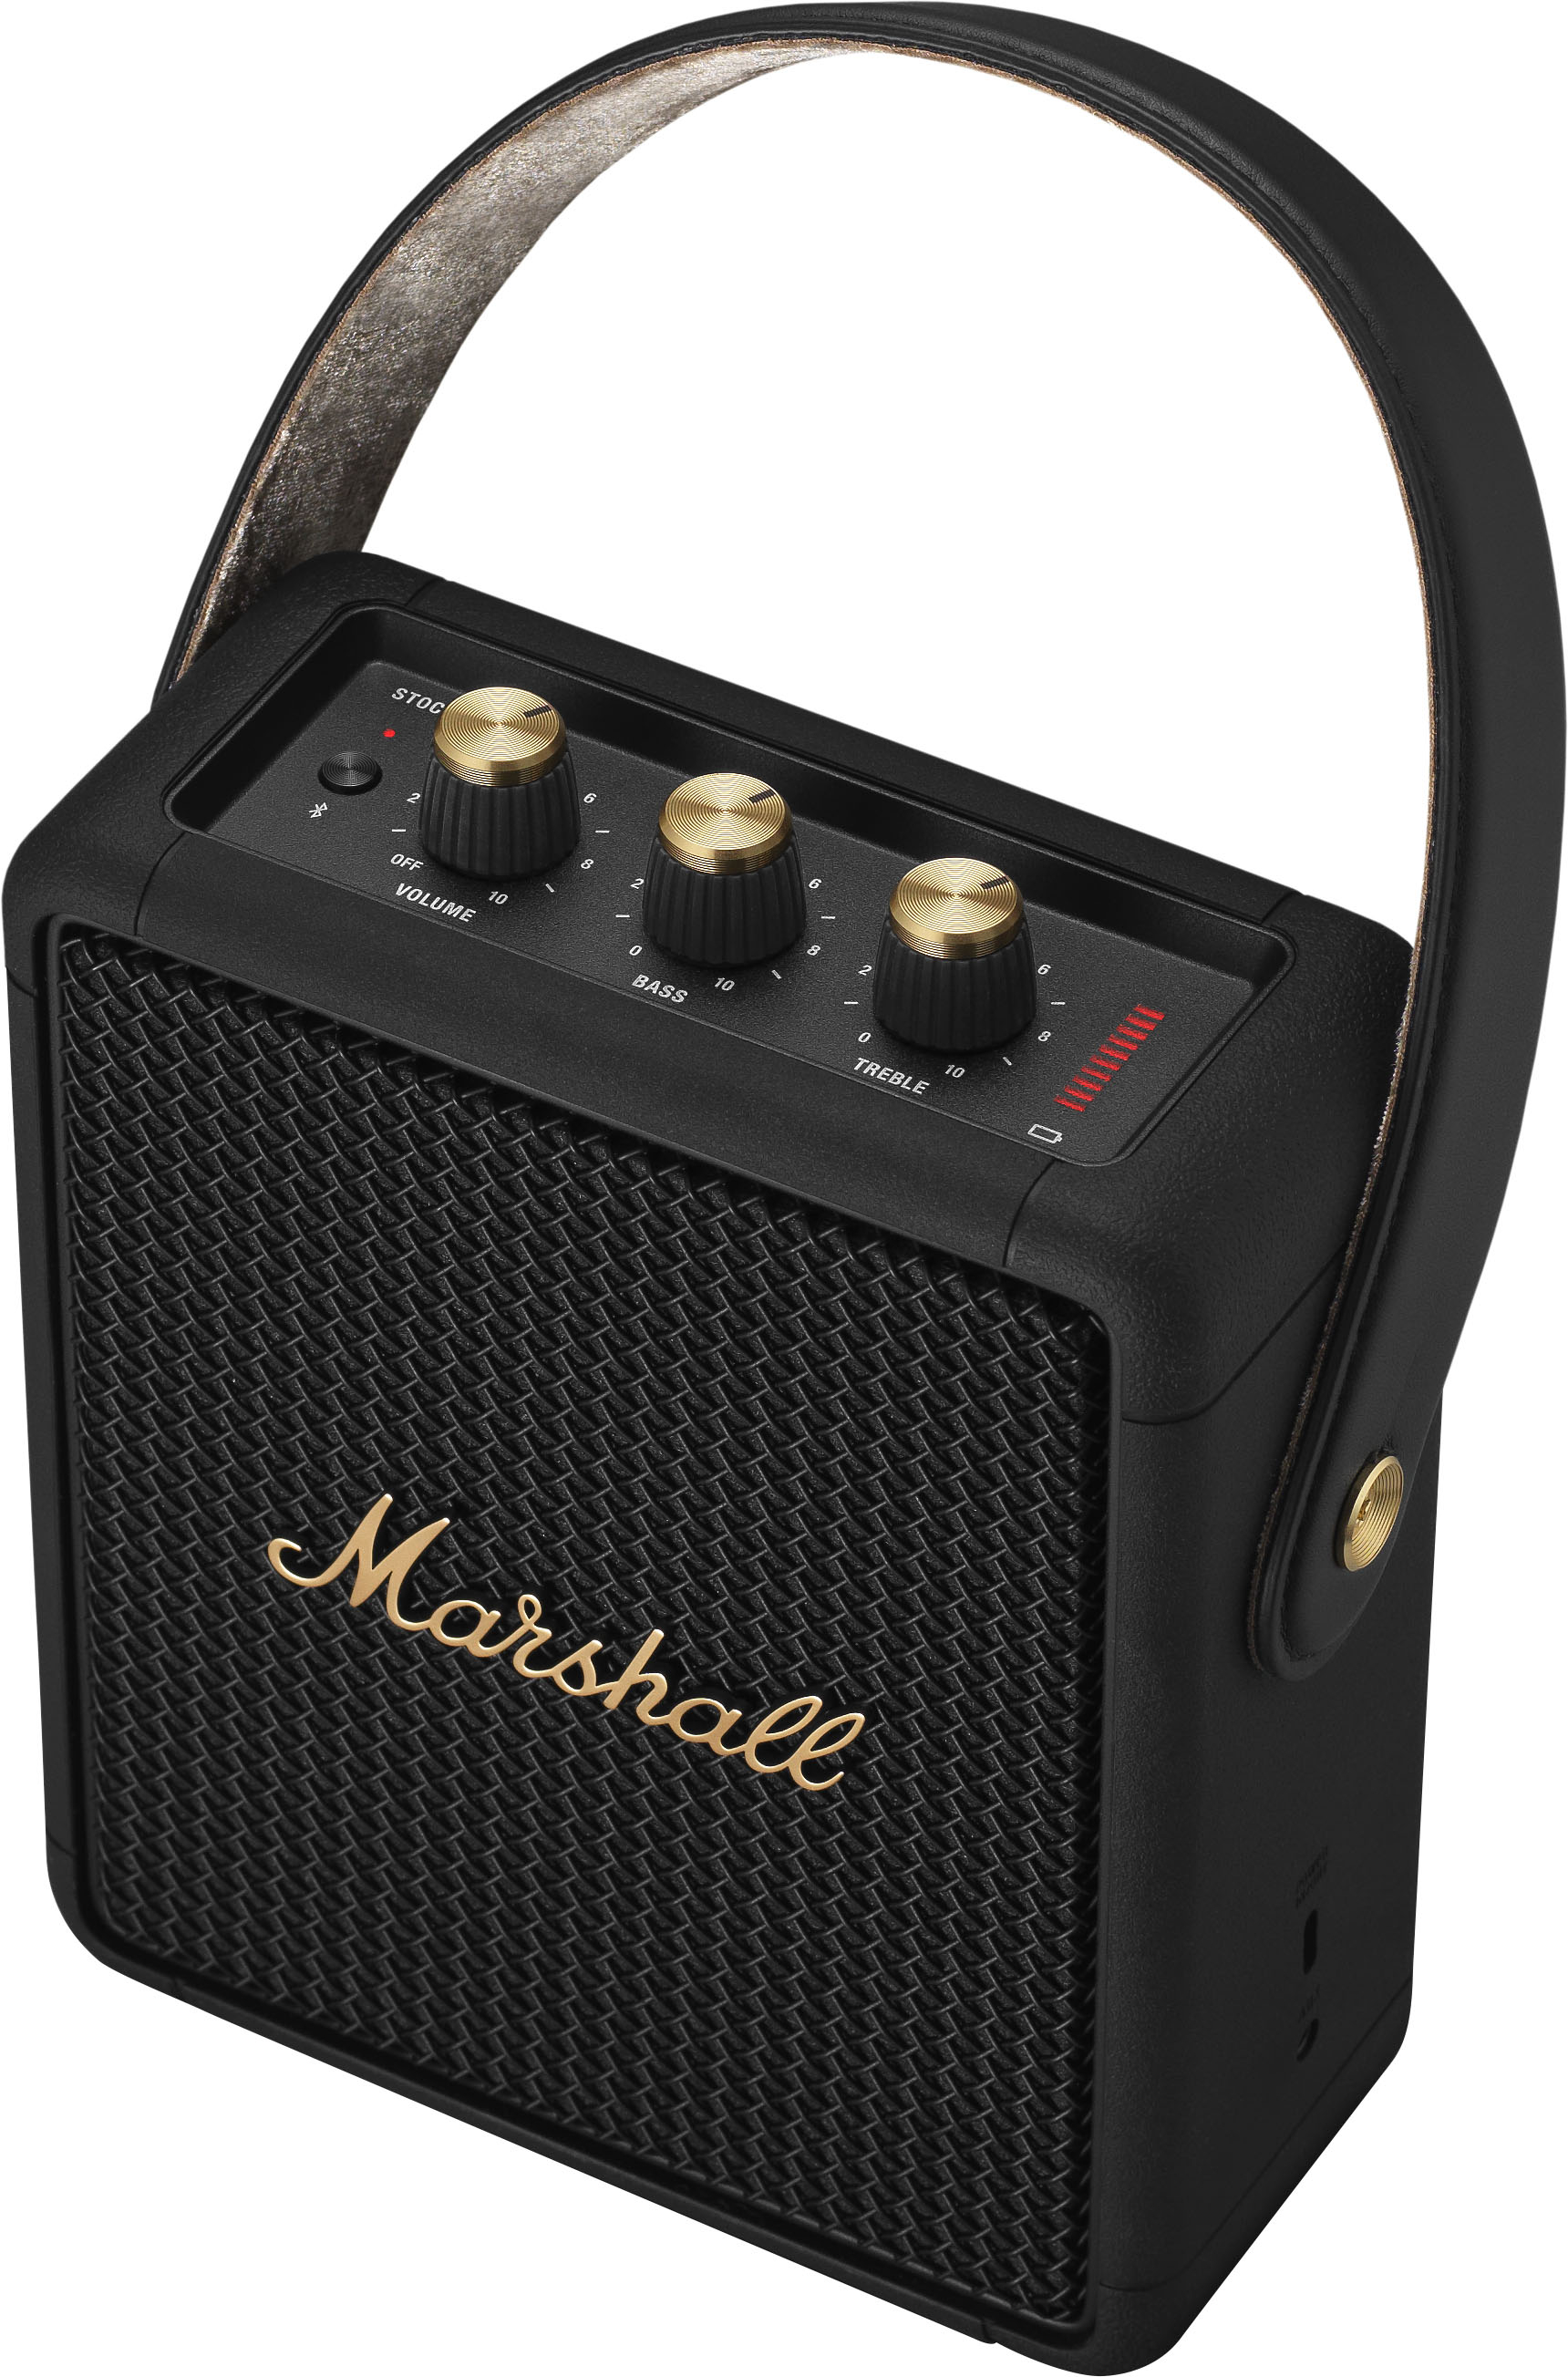 Contemporary design and sound: Marshall's Acton II Bluetooth speaker at low  of $248.50